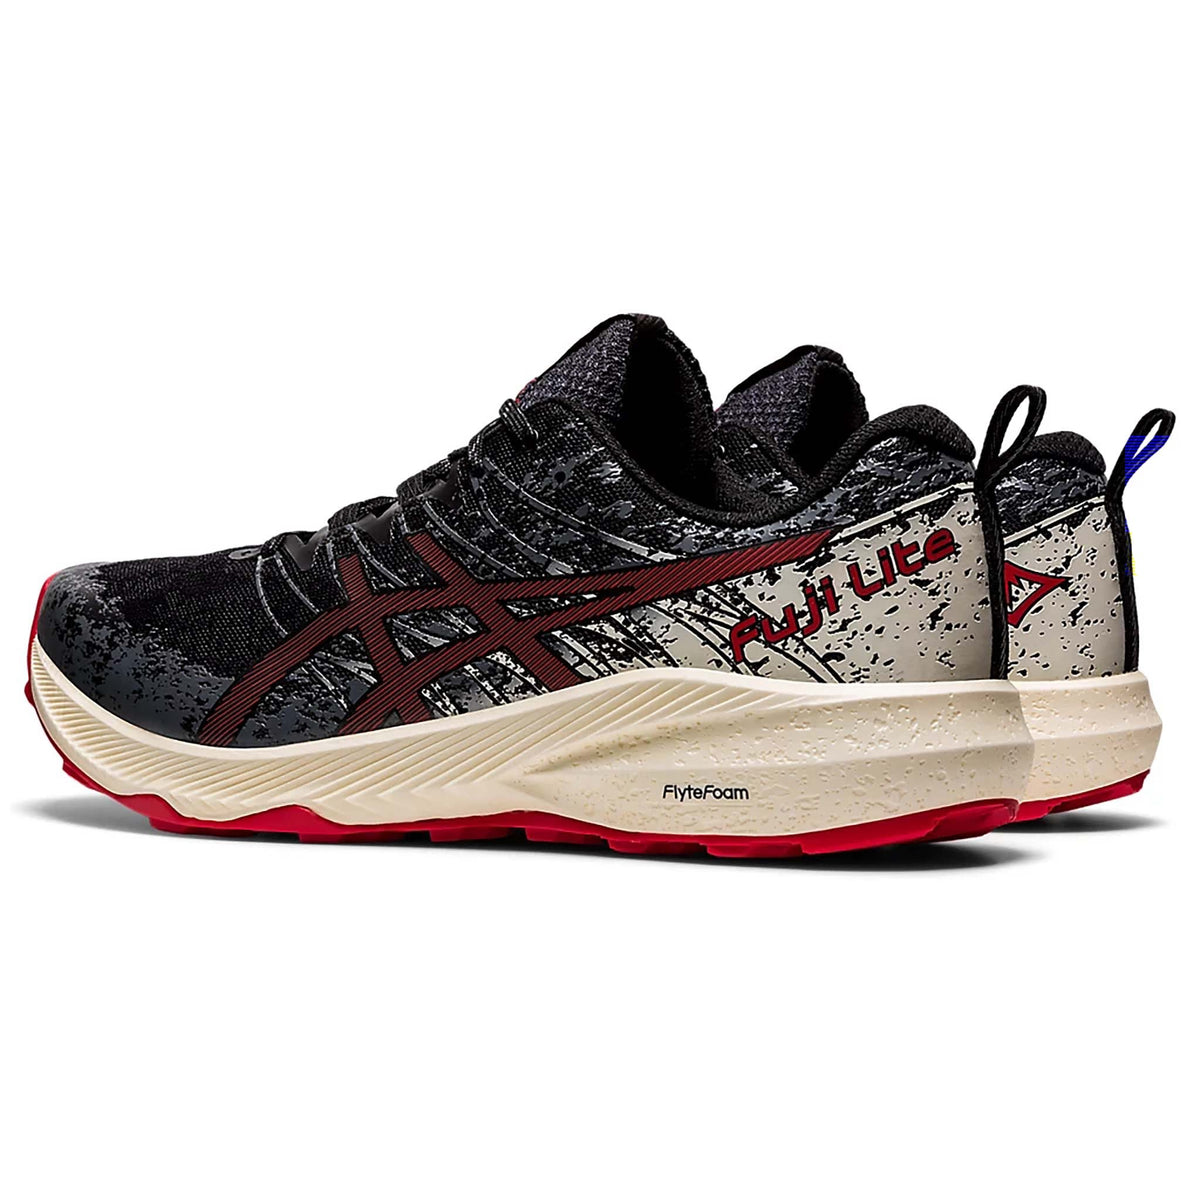 ASICS Fuji Lite 2 running homme rouge electrique lateral paire